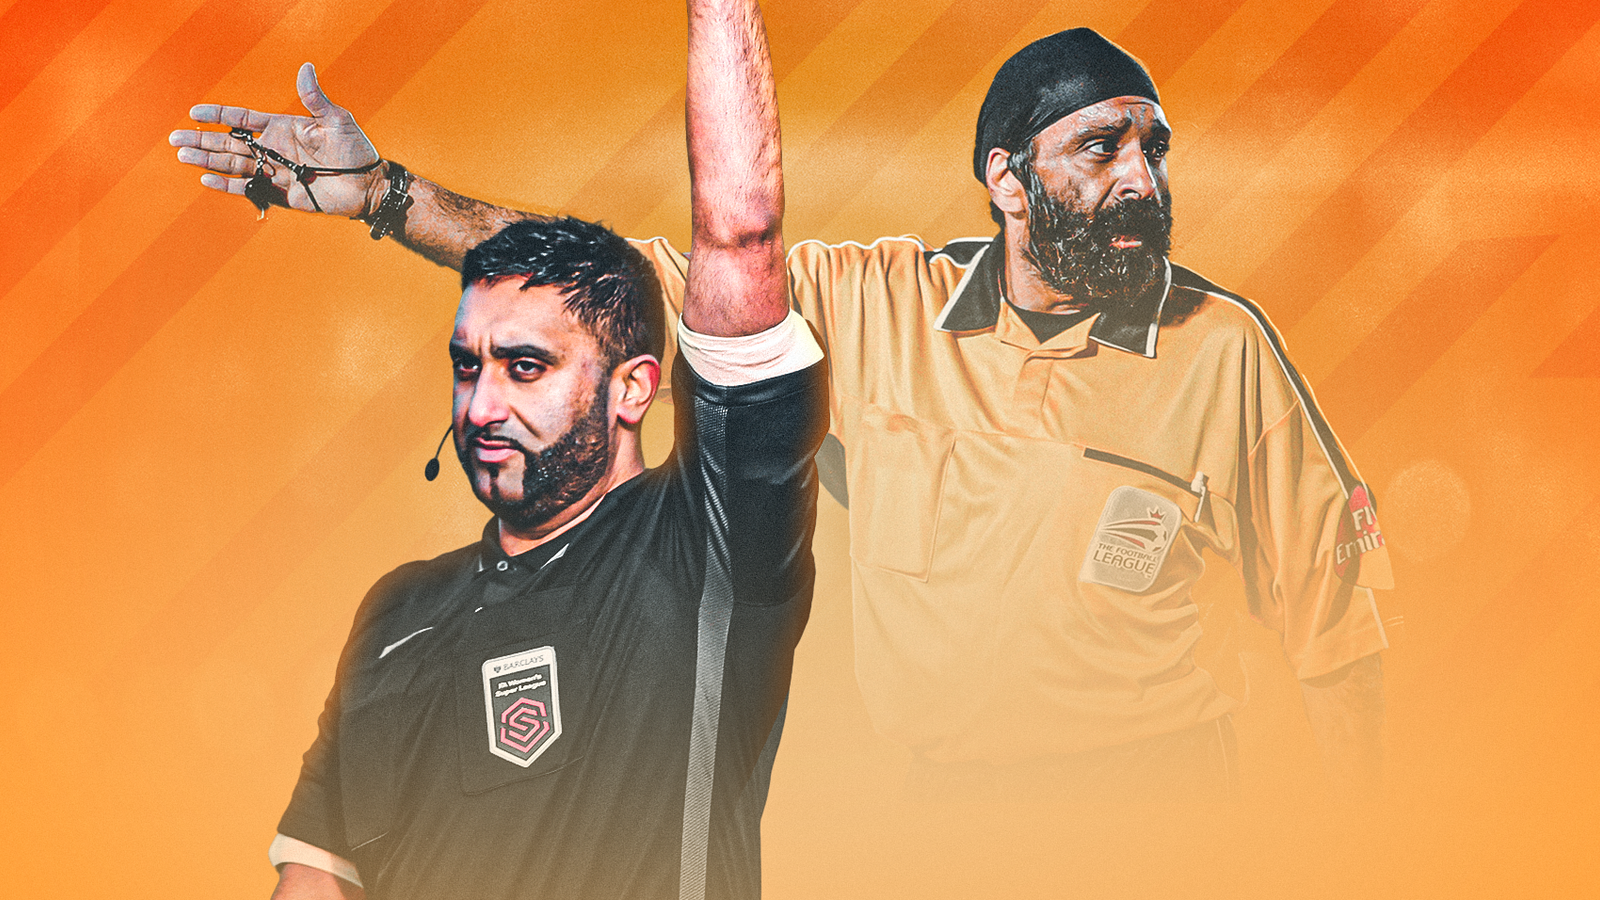 Sunny Singh Gill to ref Northampton vs Hartlepool and become first South Asian to referee league game since his dad Jarnail